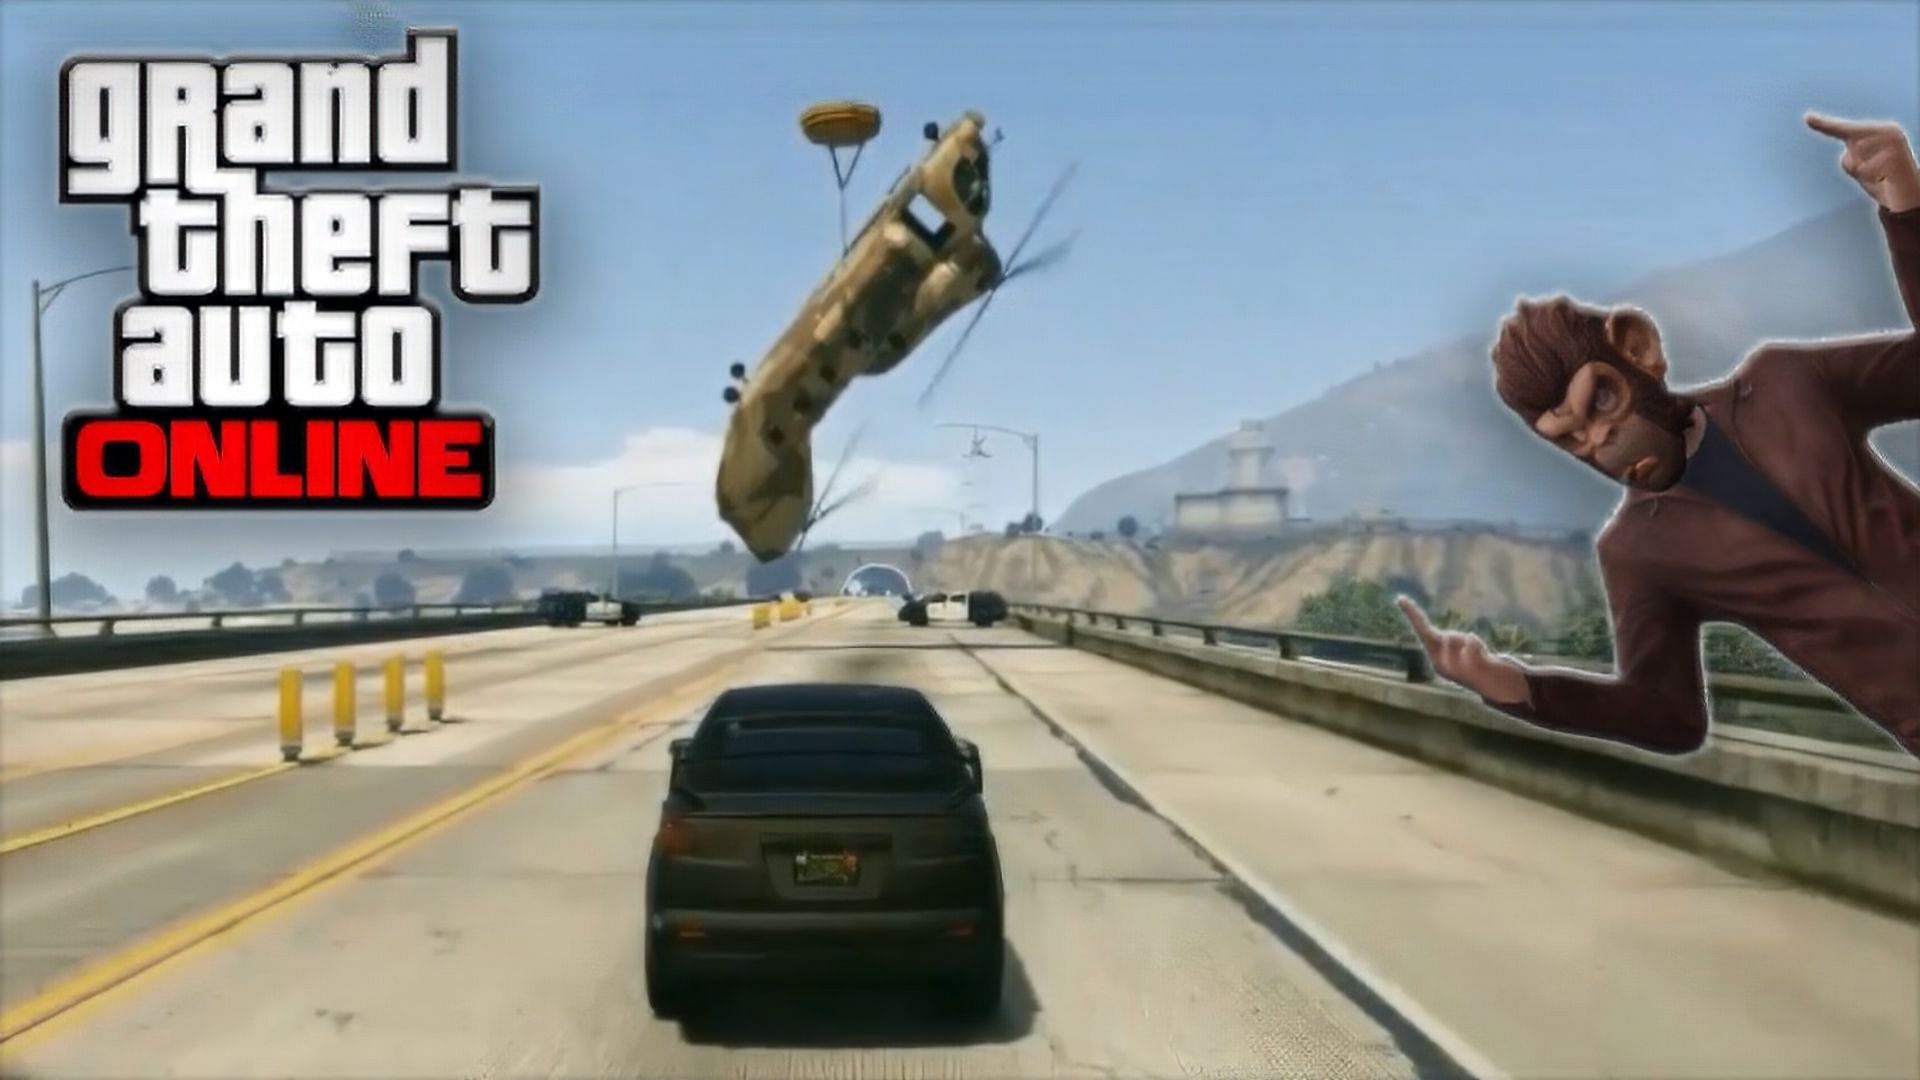 Bugs and Glitches can frustrate GTA Online players even with a high-end system. (Image via YouTube/LegoAssassin13)